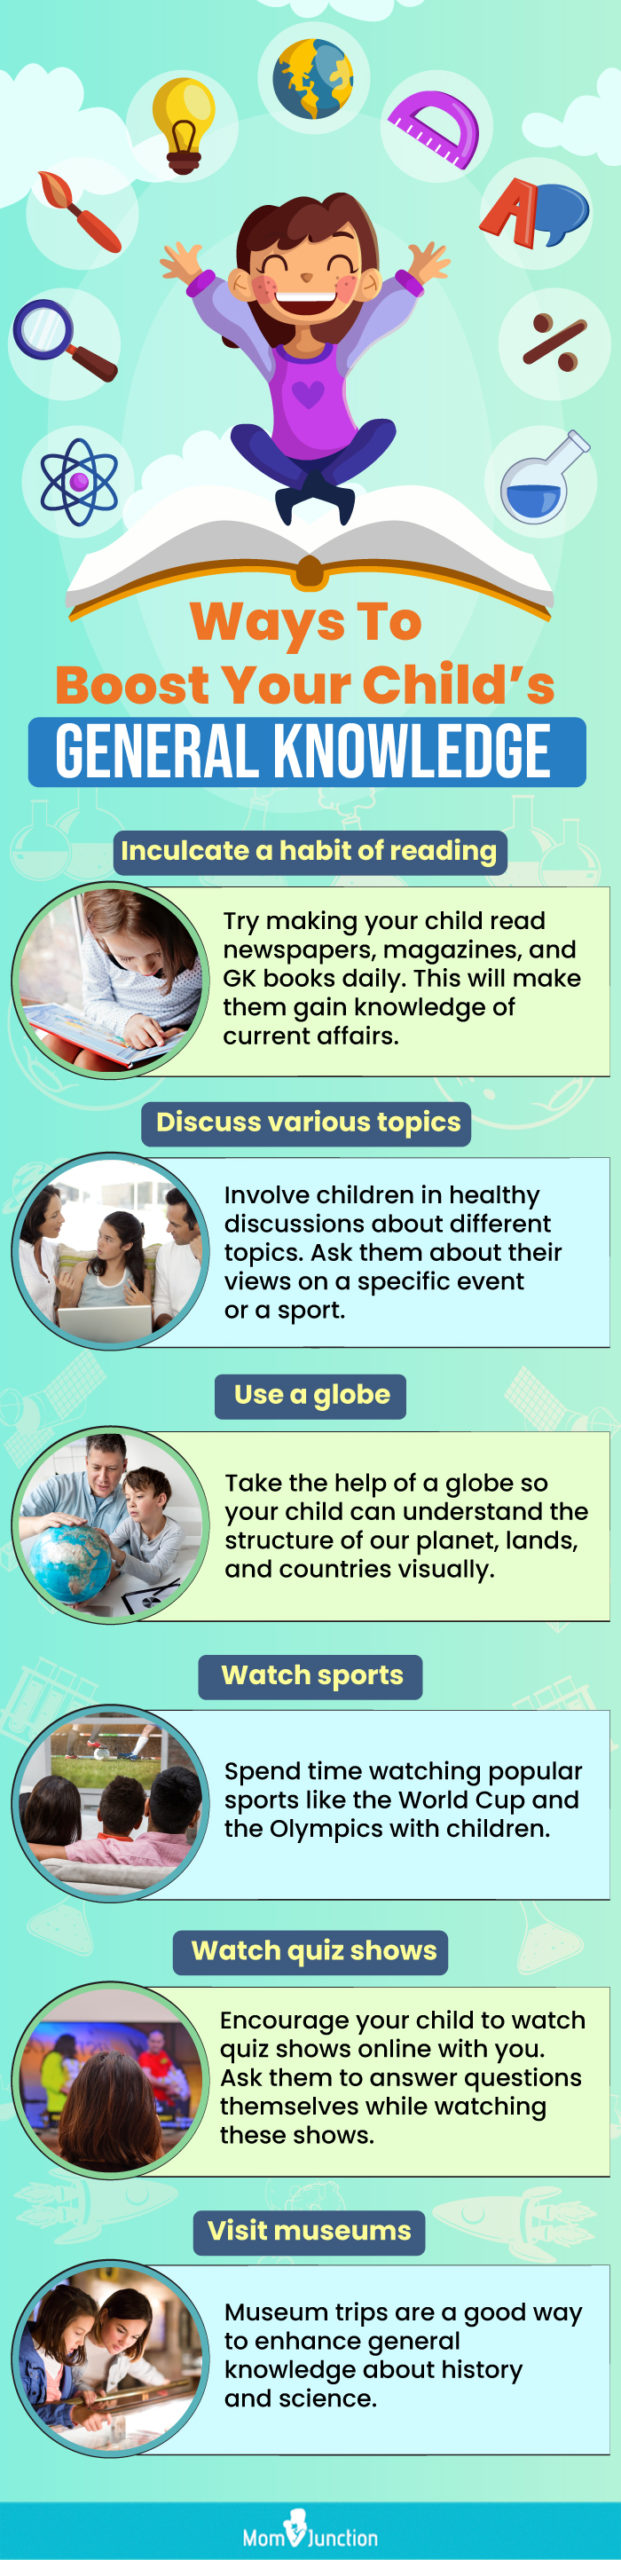 ways to boost your childs general knowledge (infographic)